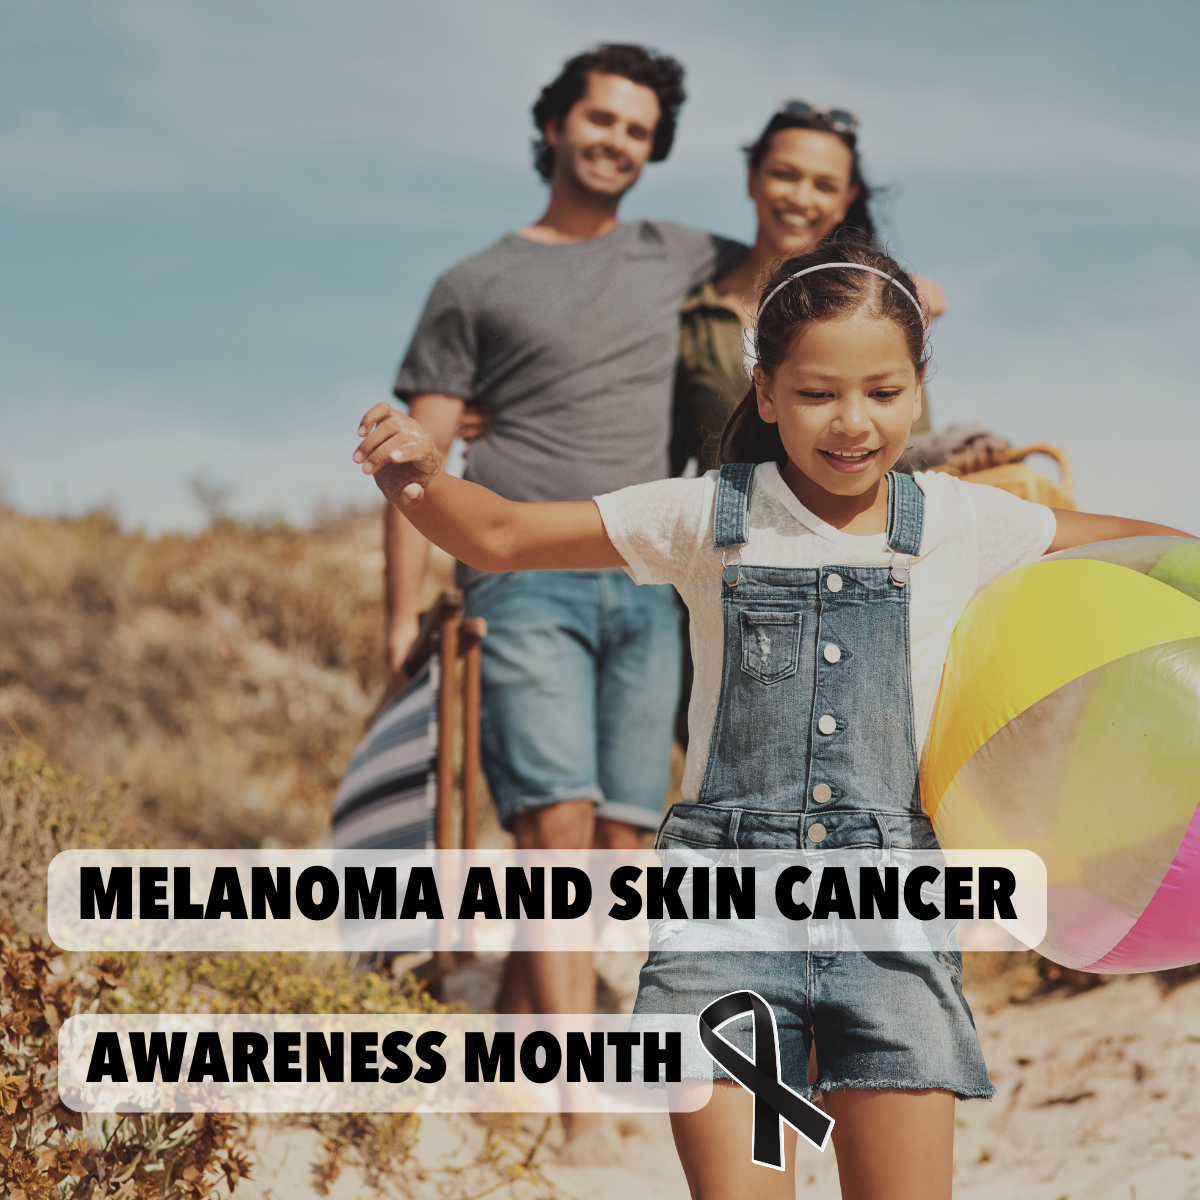 Image of family at the beach. Foreground is of young girl running with beach ball. Overlay text reads: Melanoma and Skin Cancer Awareness Month